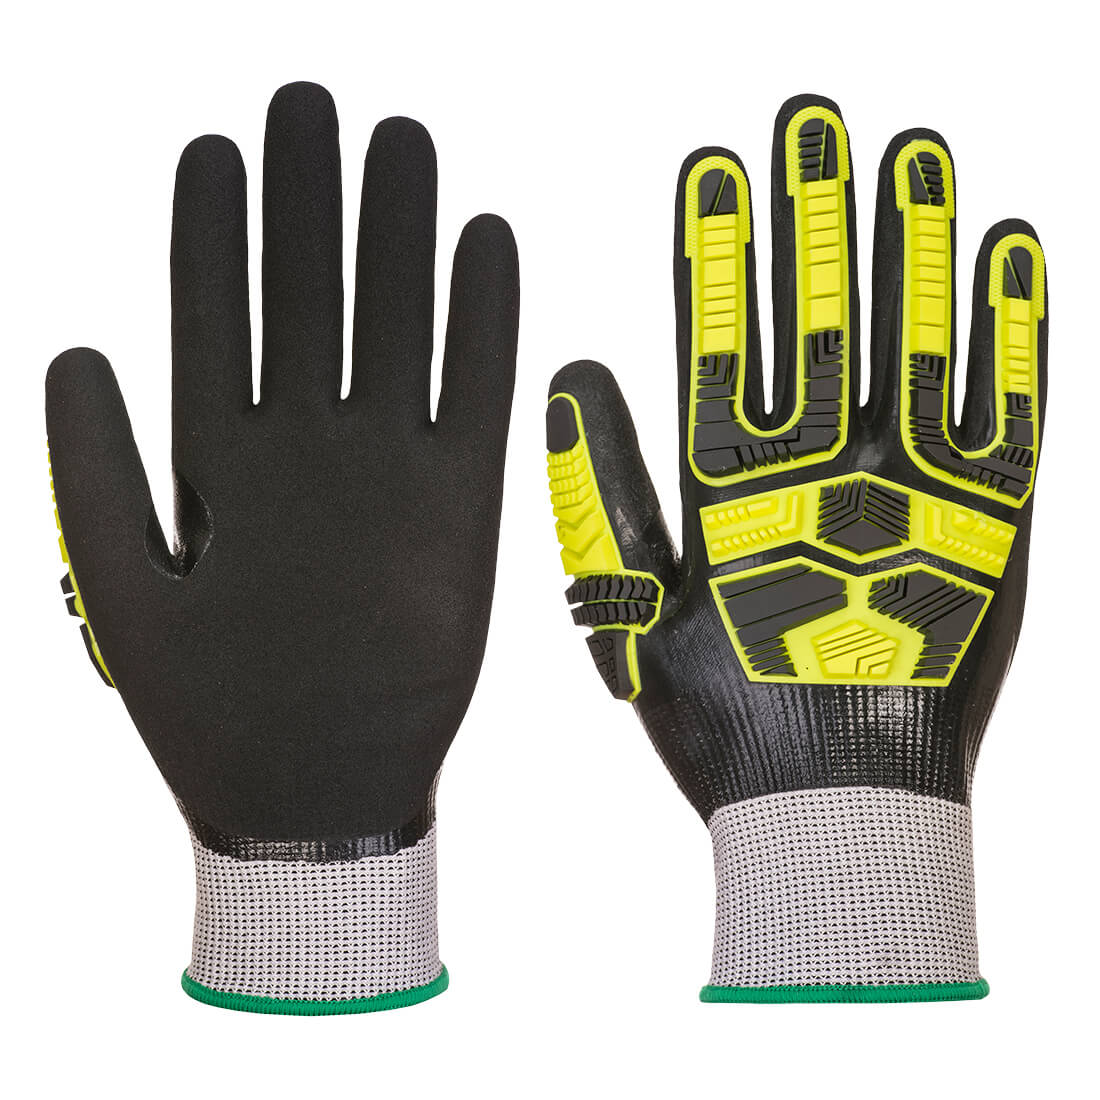 HAND PROTECTION, Anti Impact Gloves